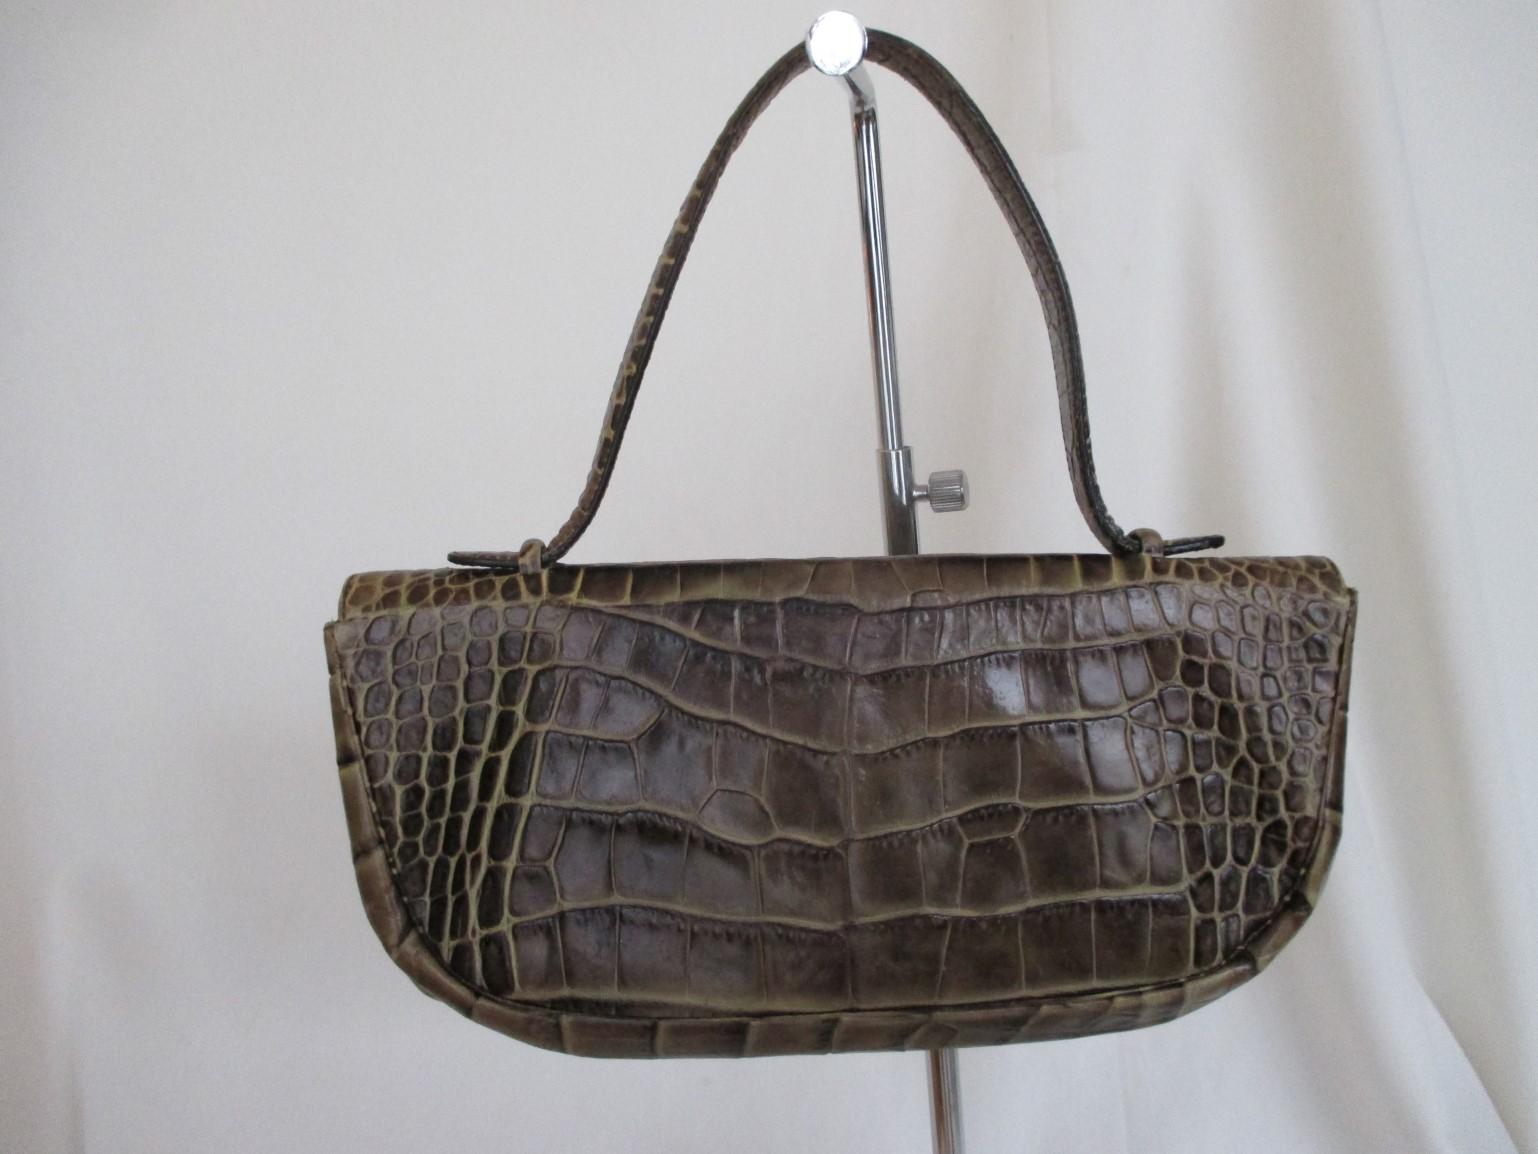 Classic vintage Sonia Rykiel embossed leather bag.
- edgy and chic
It closes with a magnetic press stud
one pocket inside.
The bag is worn has some spots inside lining and on bucket.

Dimensions aproxx: 
width 29 cm/ 11.41 inch 
height 14 cm/ 5.51